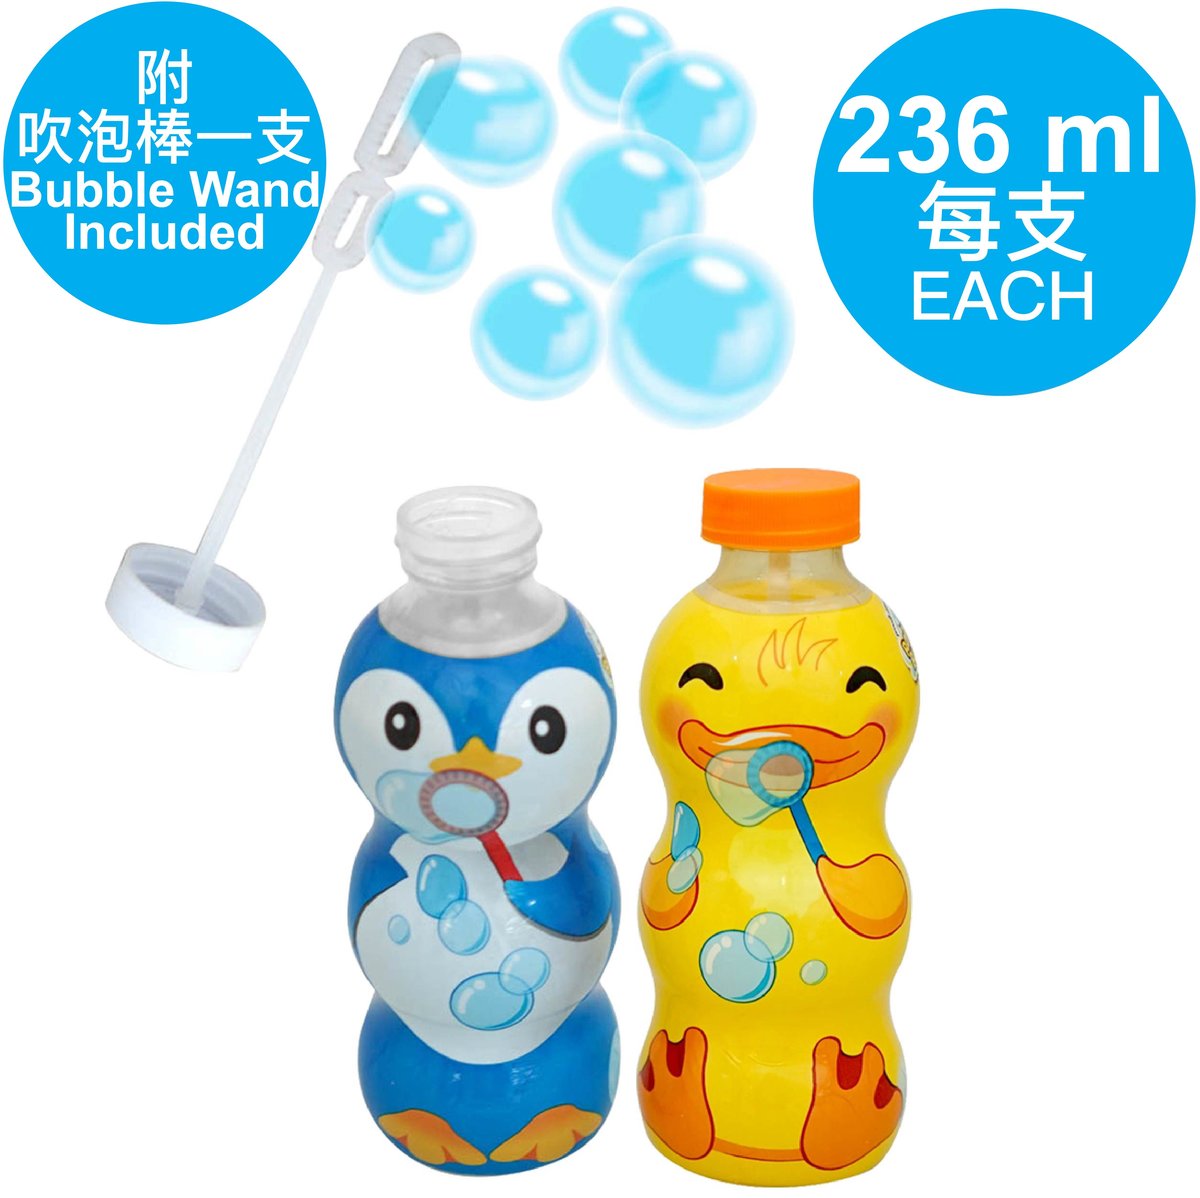 Animal Bubbles Set (1 Penguin and 1 Duck printed Bottle Bubbles) - Blowing Wand included